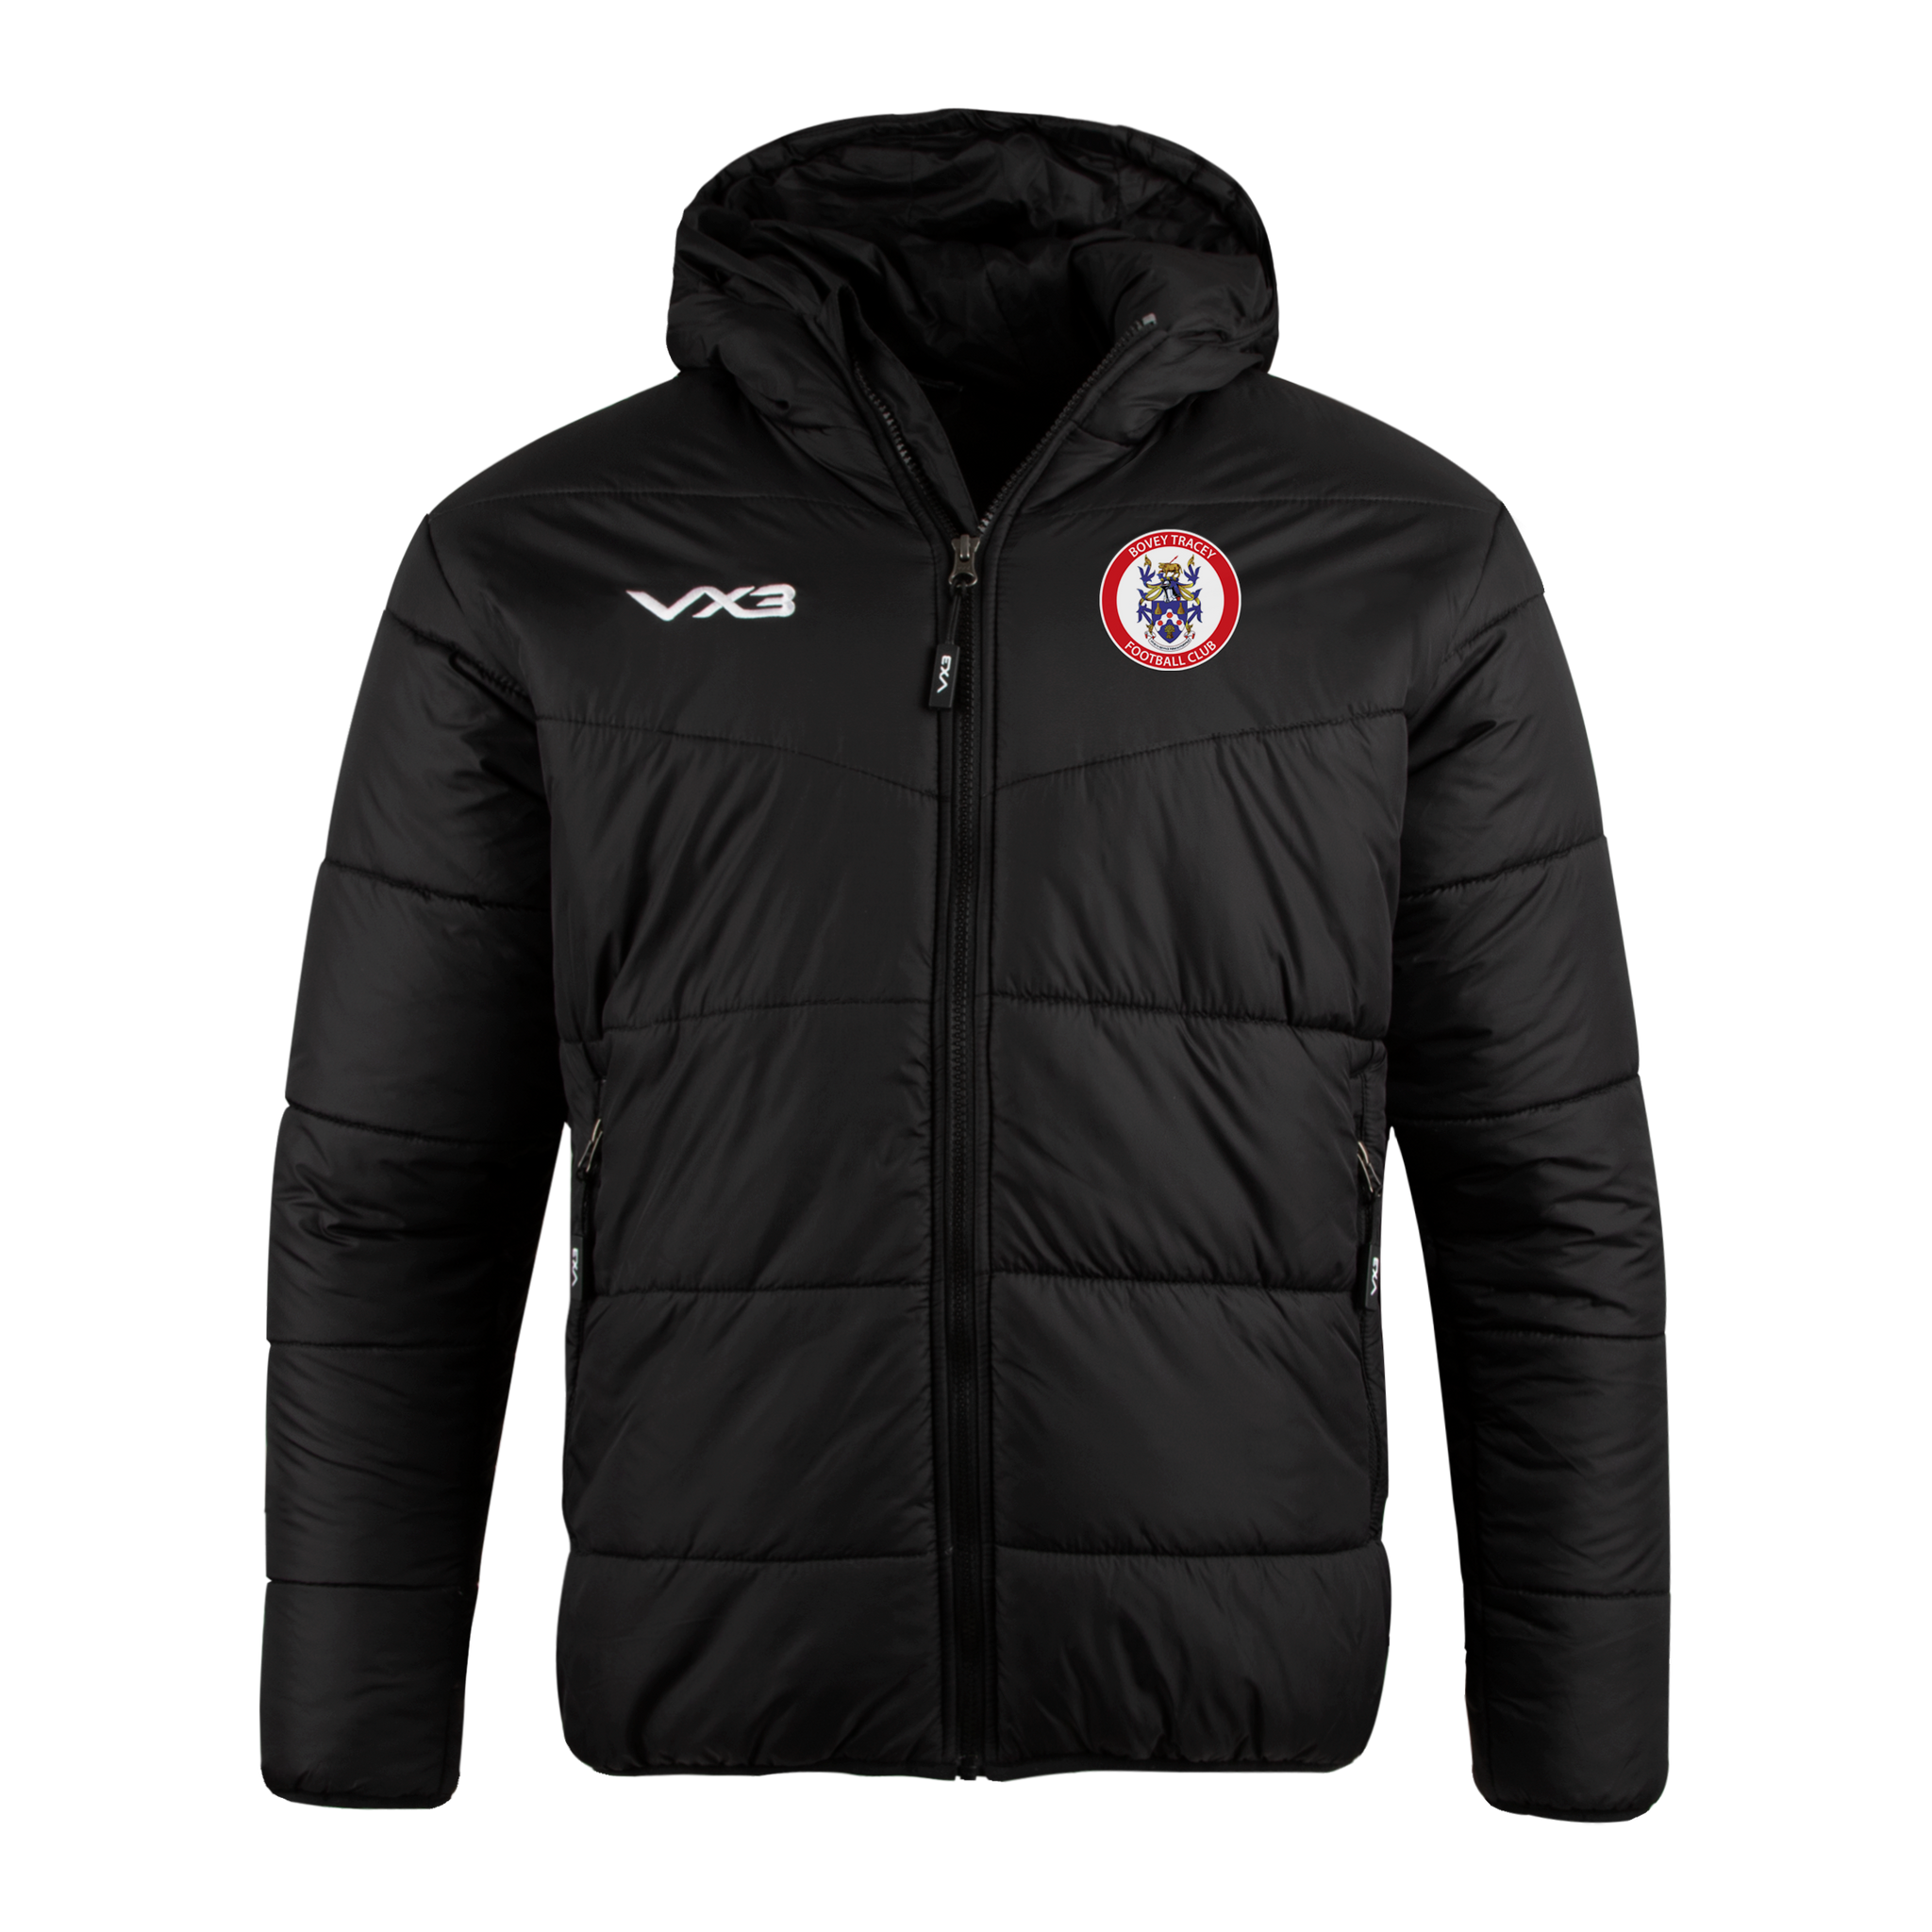 Bovey Tracey AFC Lorica Youth Quilted Jacket